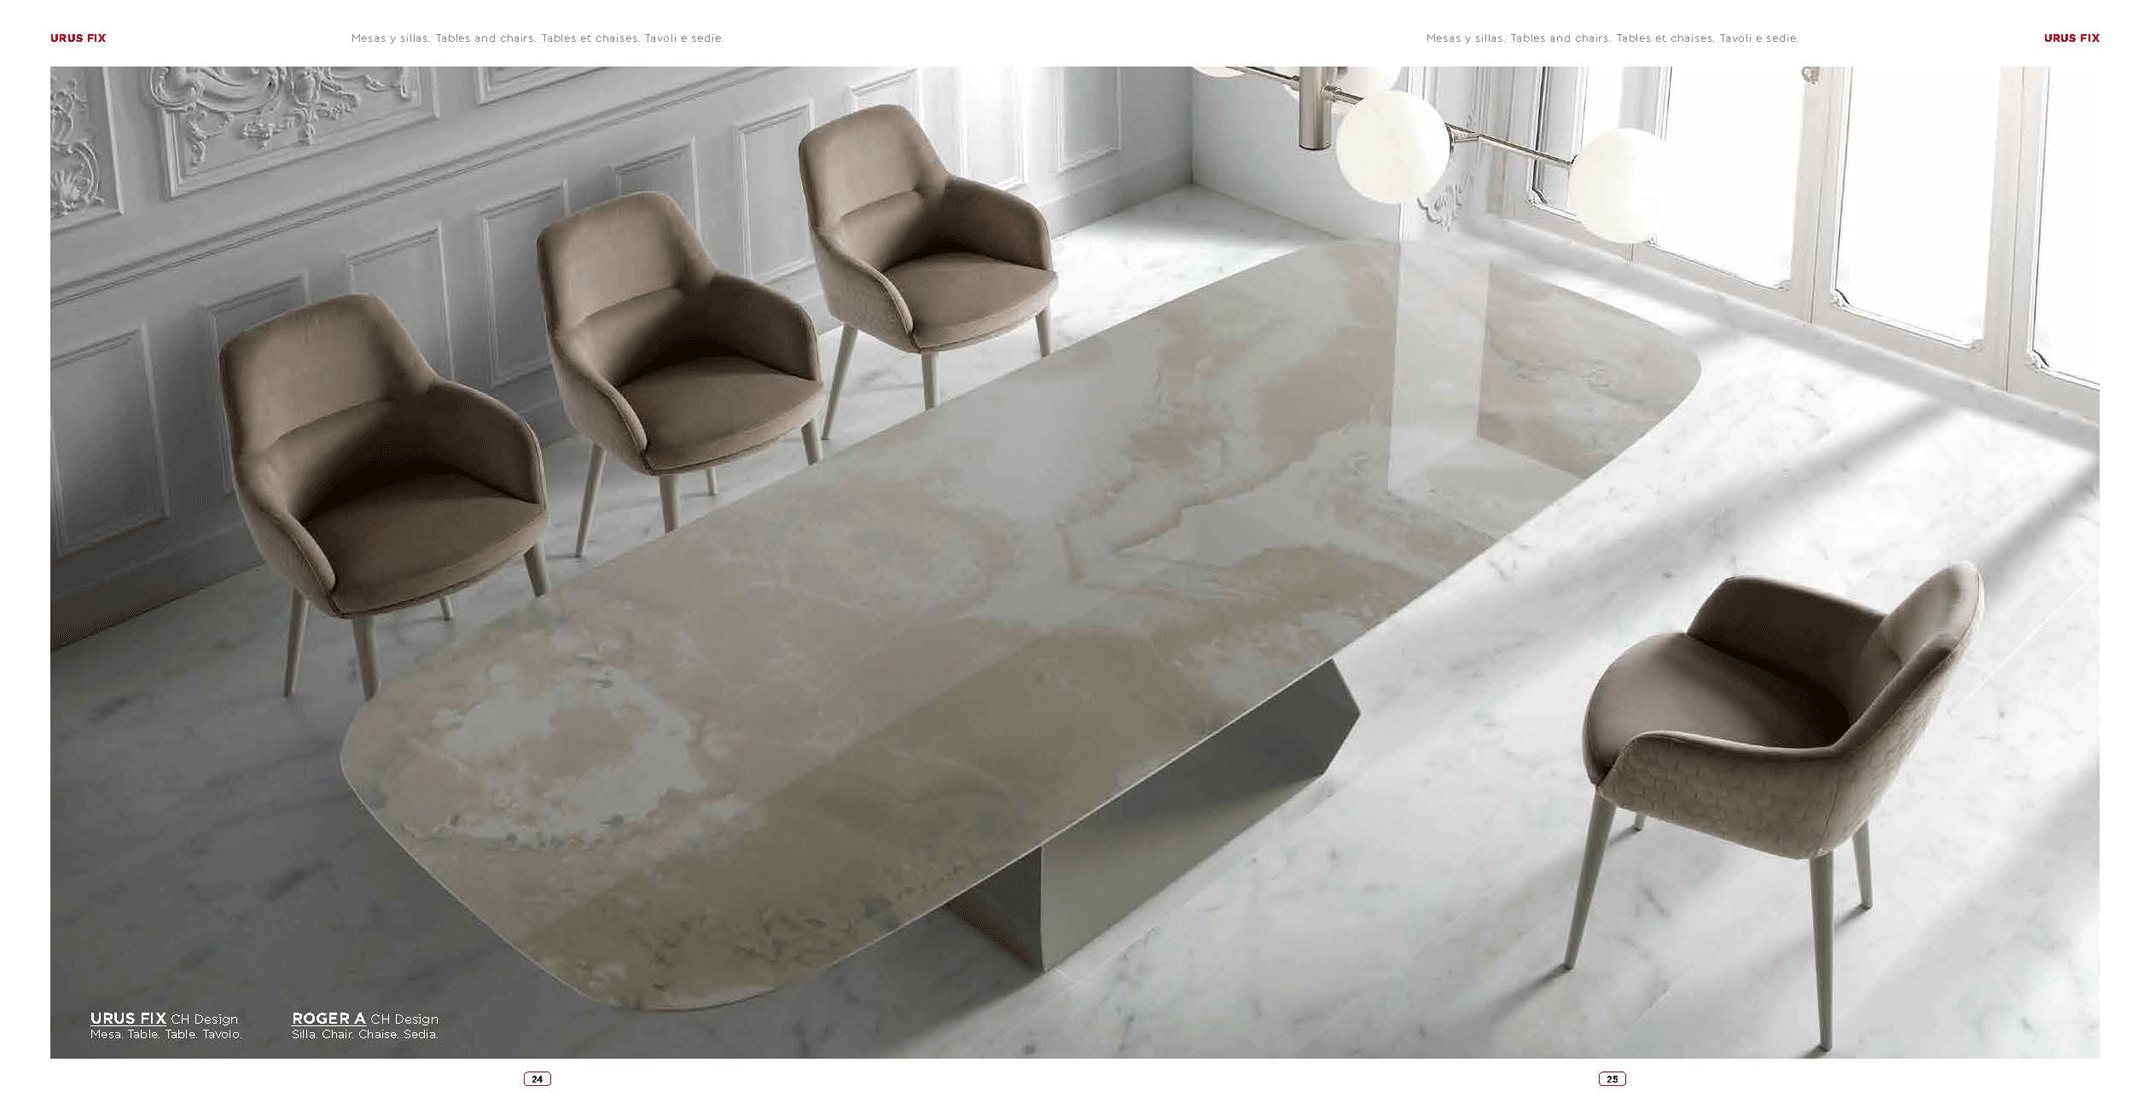 Dining Room Furniture Marble-Look Tables Urus Fix Dining Table and Roger A chair